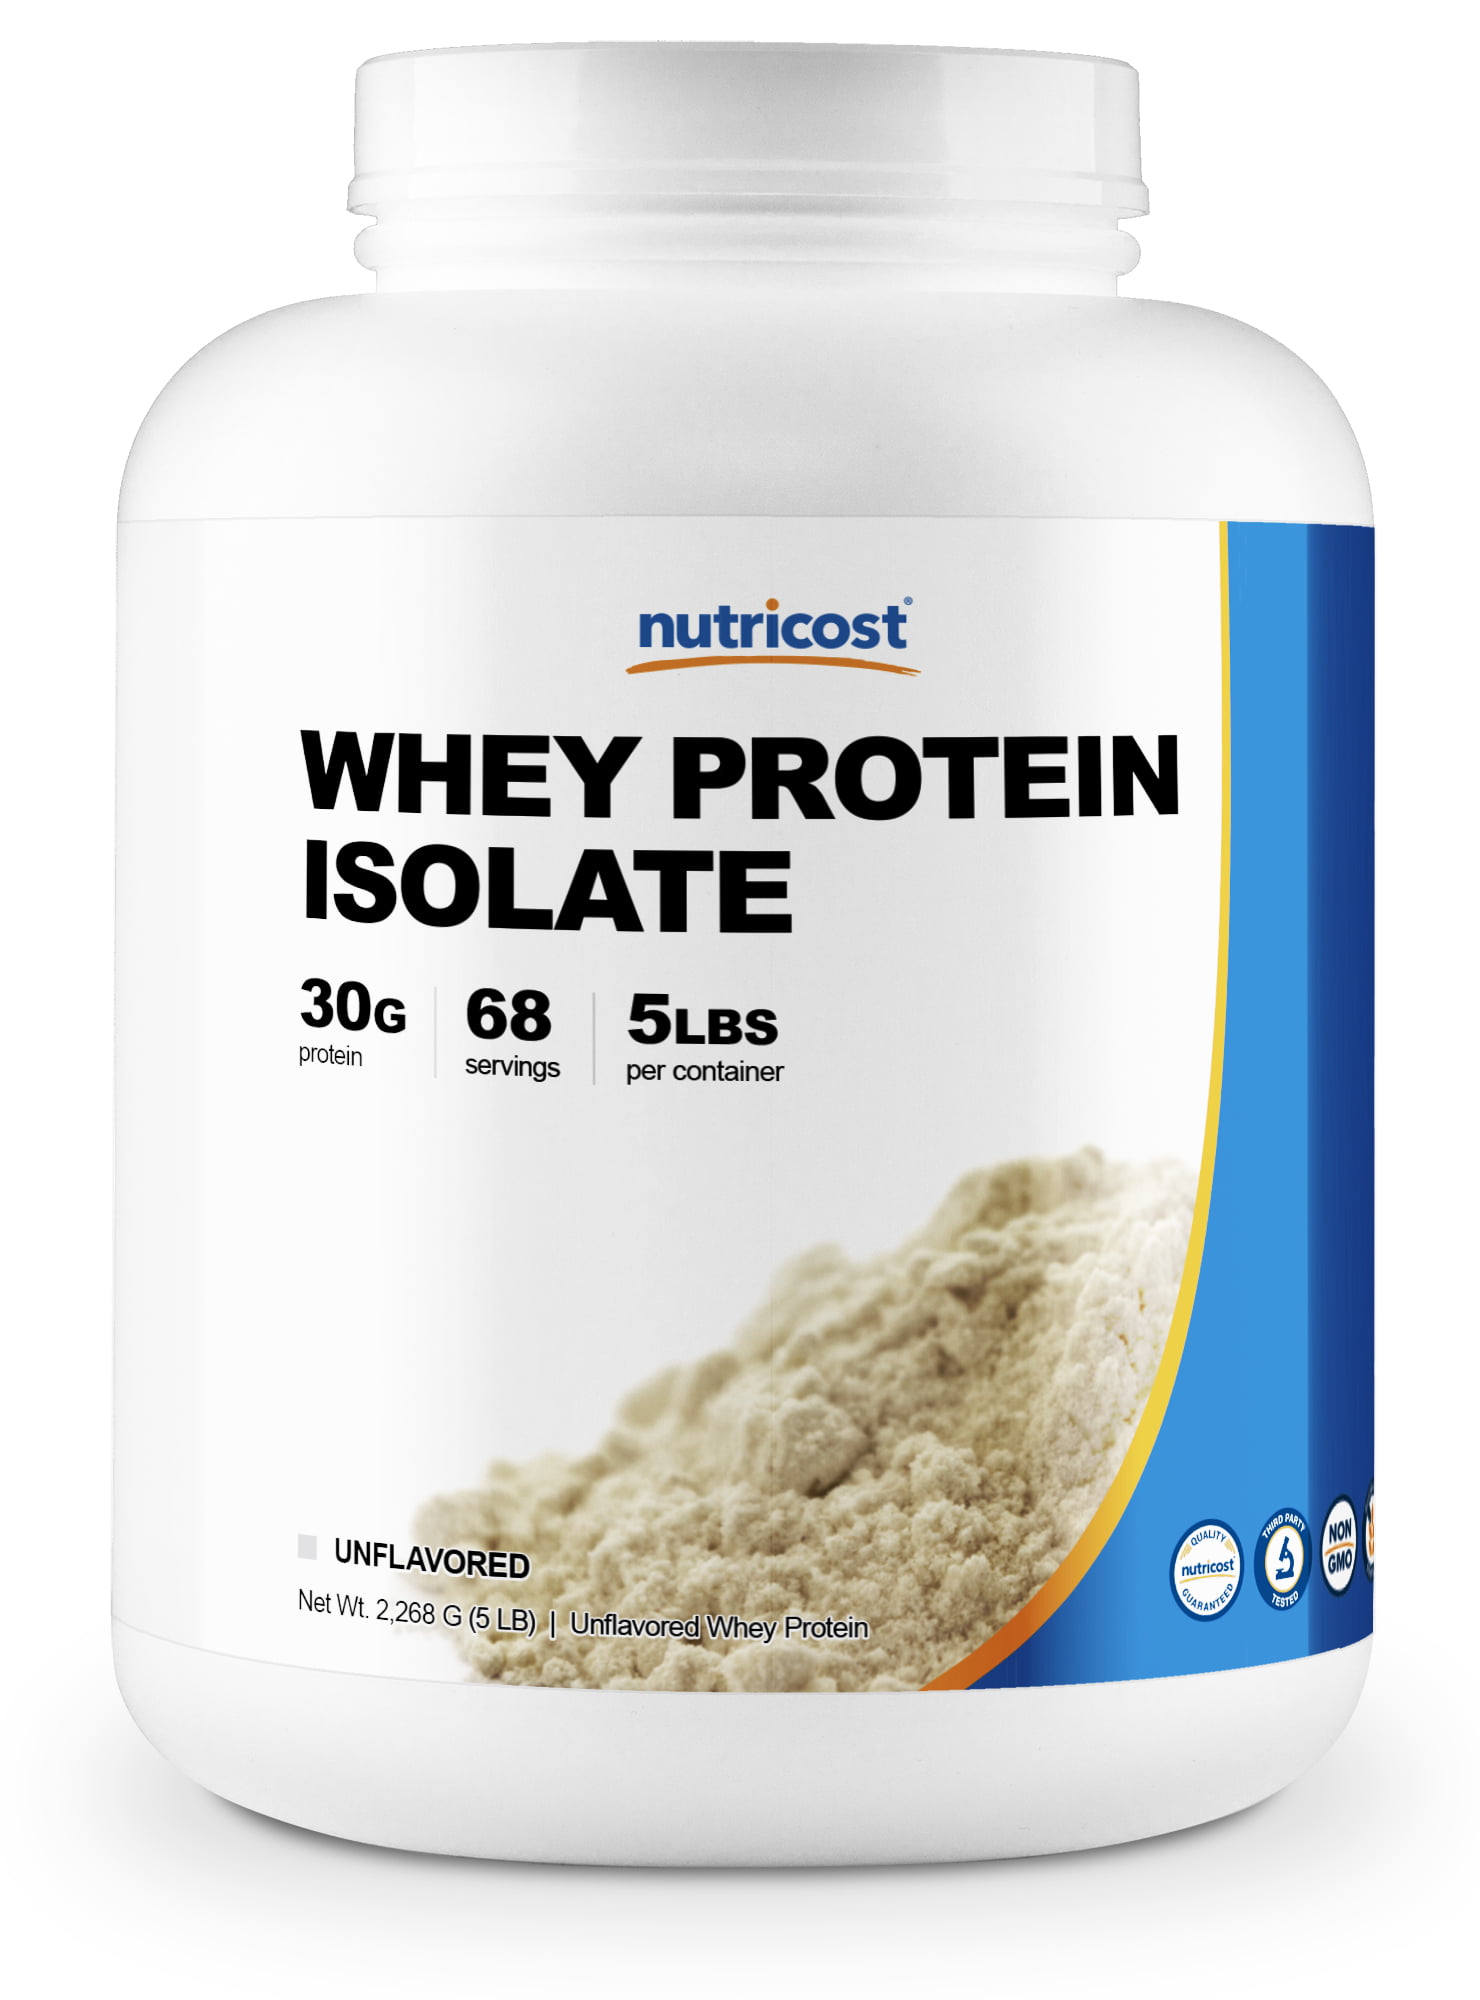 Nutricost Whey Protein Isolate Unflavored 5lbs